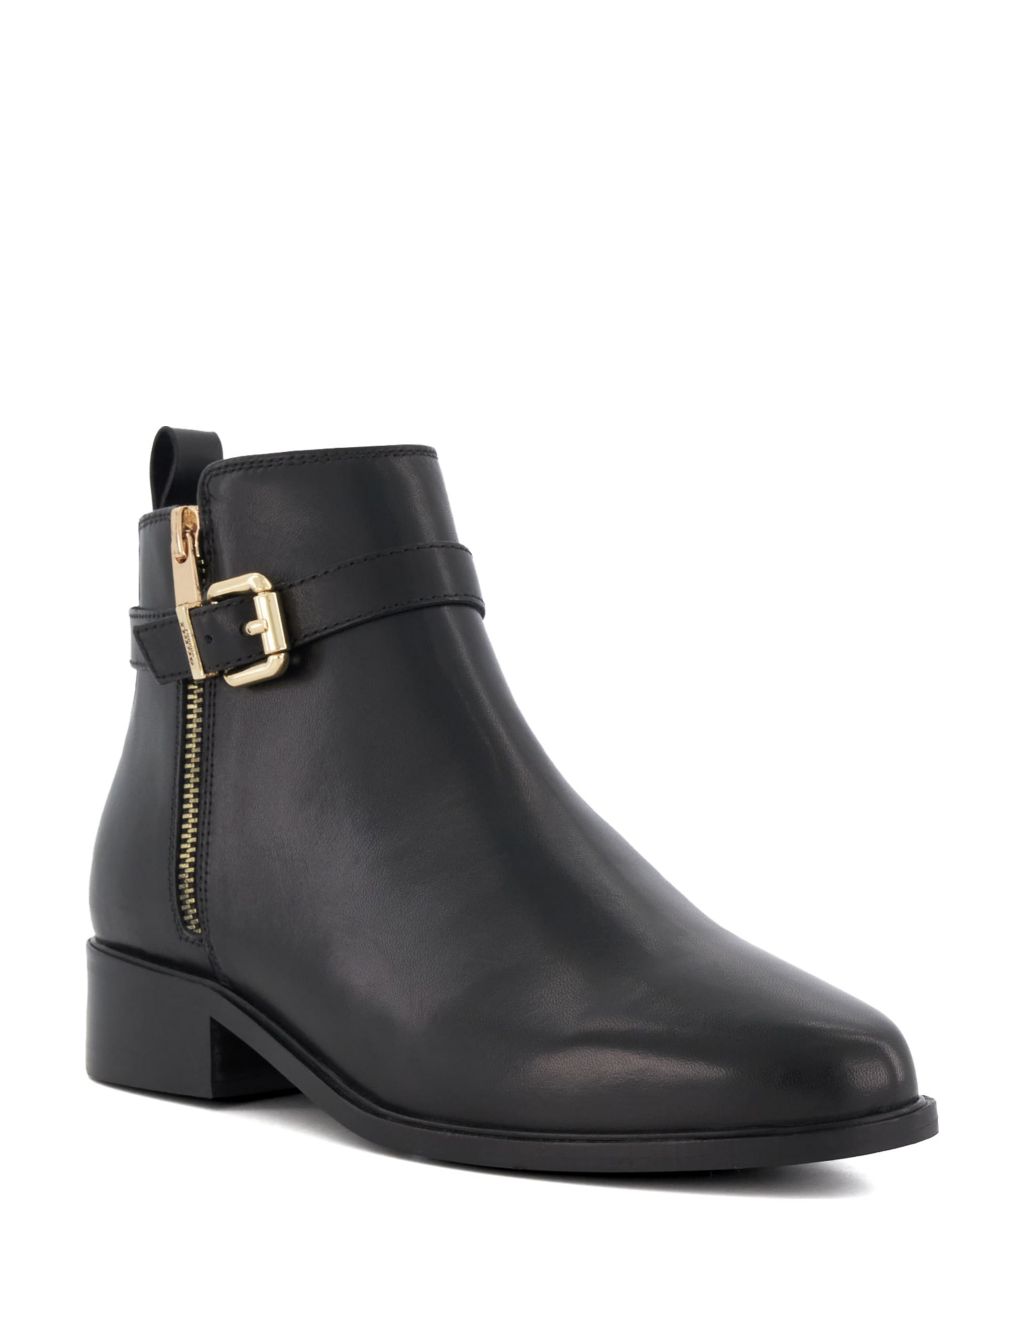 Leather Buckle Ankle Boots image 2